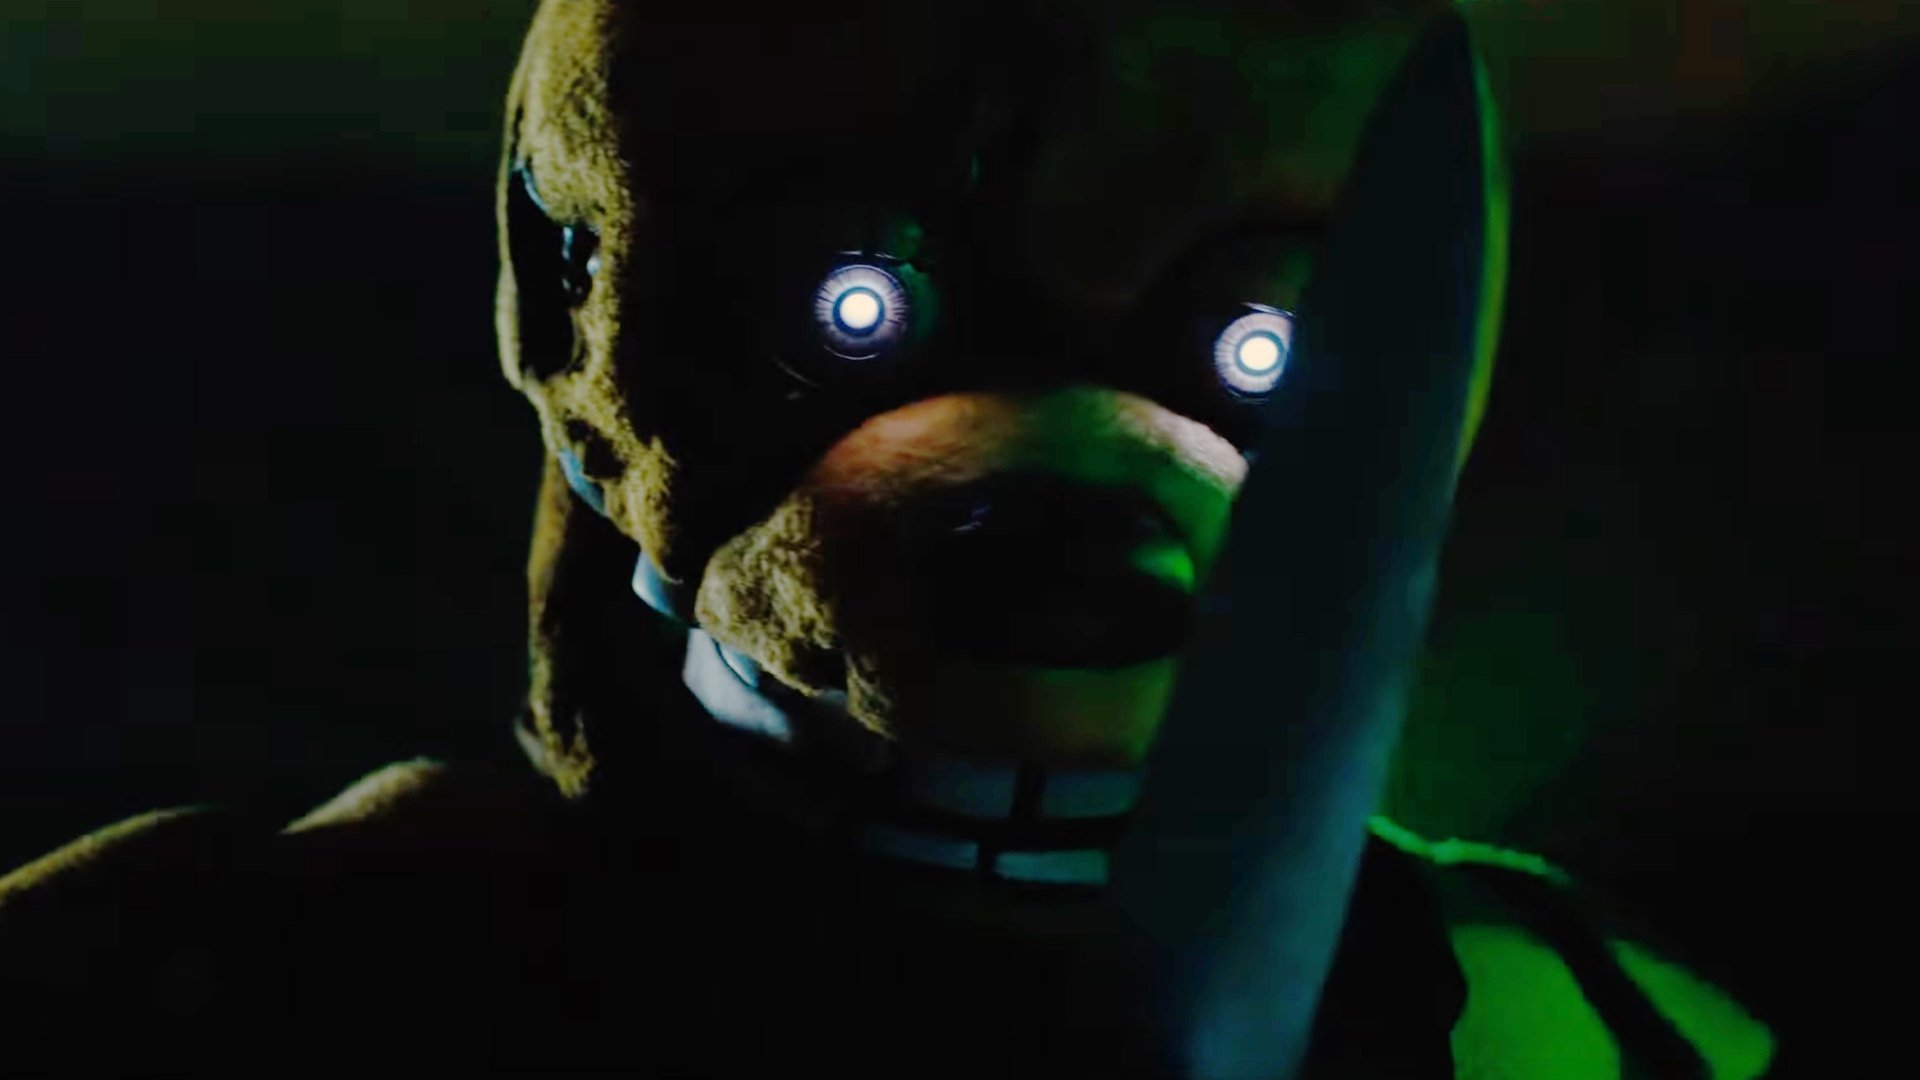 Five Nights at Freddy's' Lands Worst Video Game Film Reviews in 7